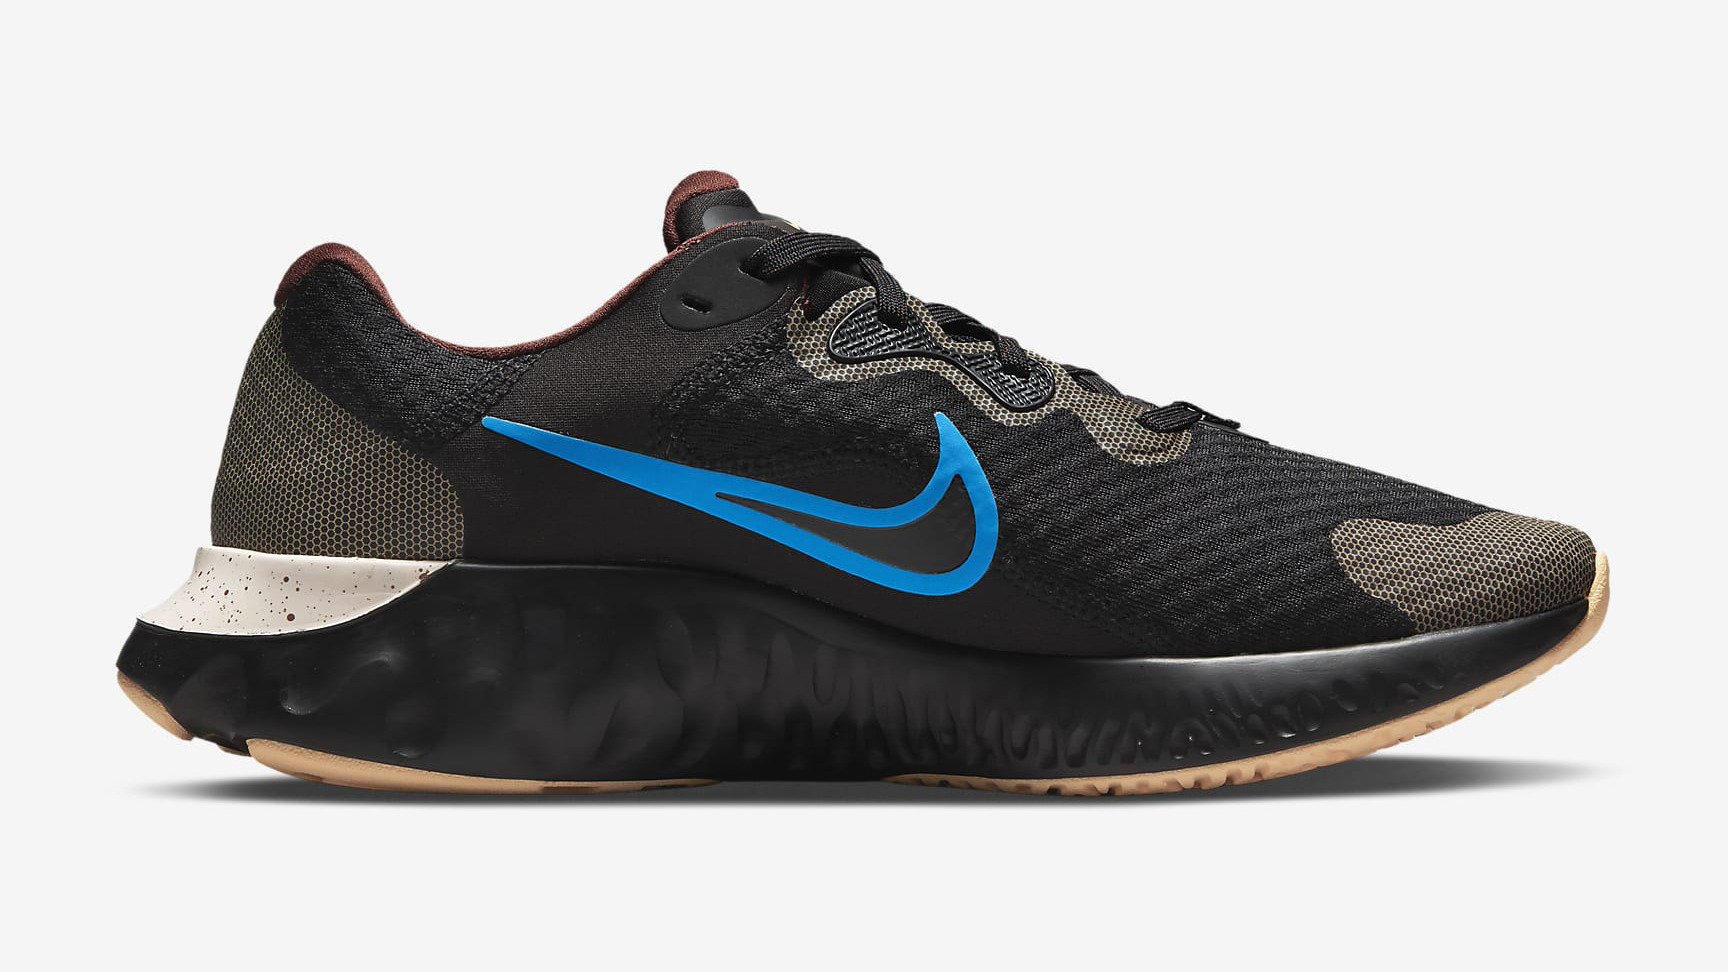 These Cyber Monday Nike deals will make 